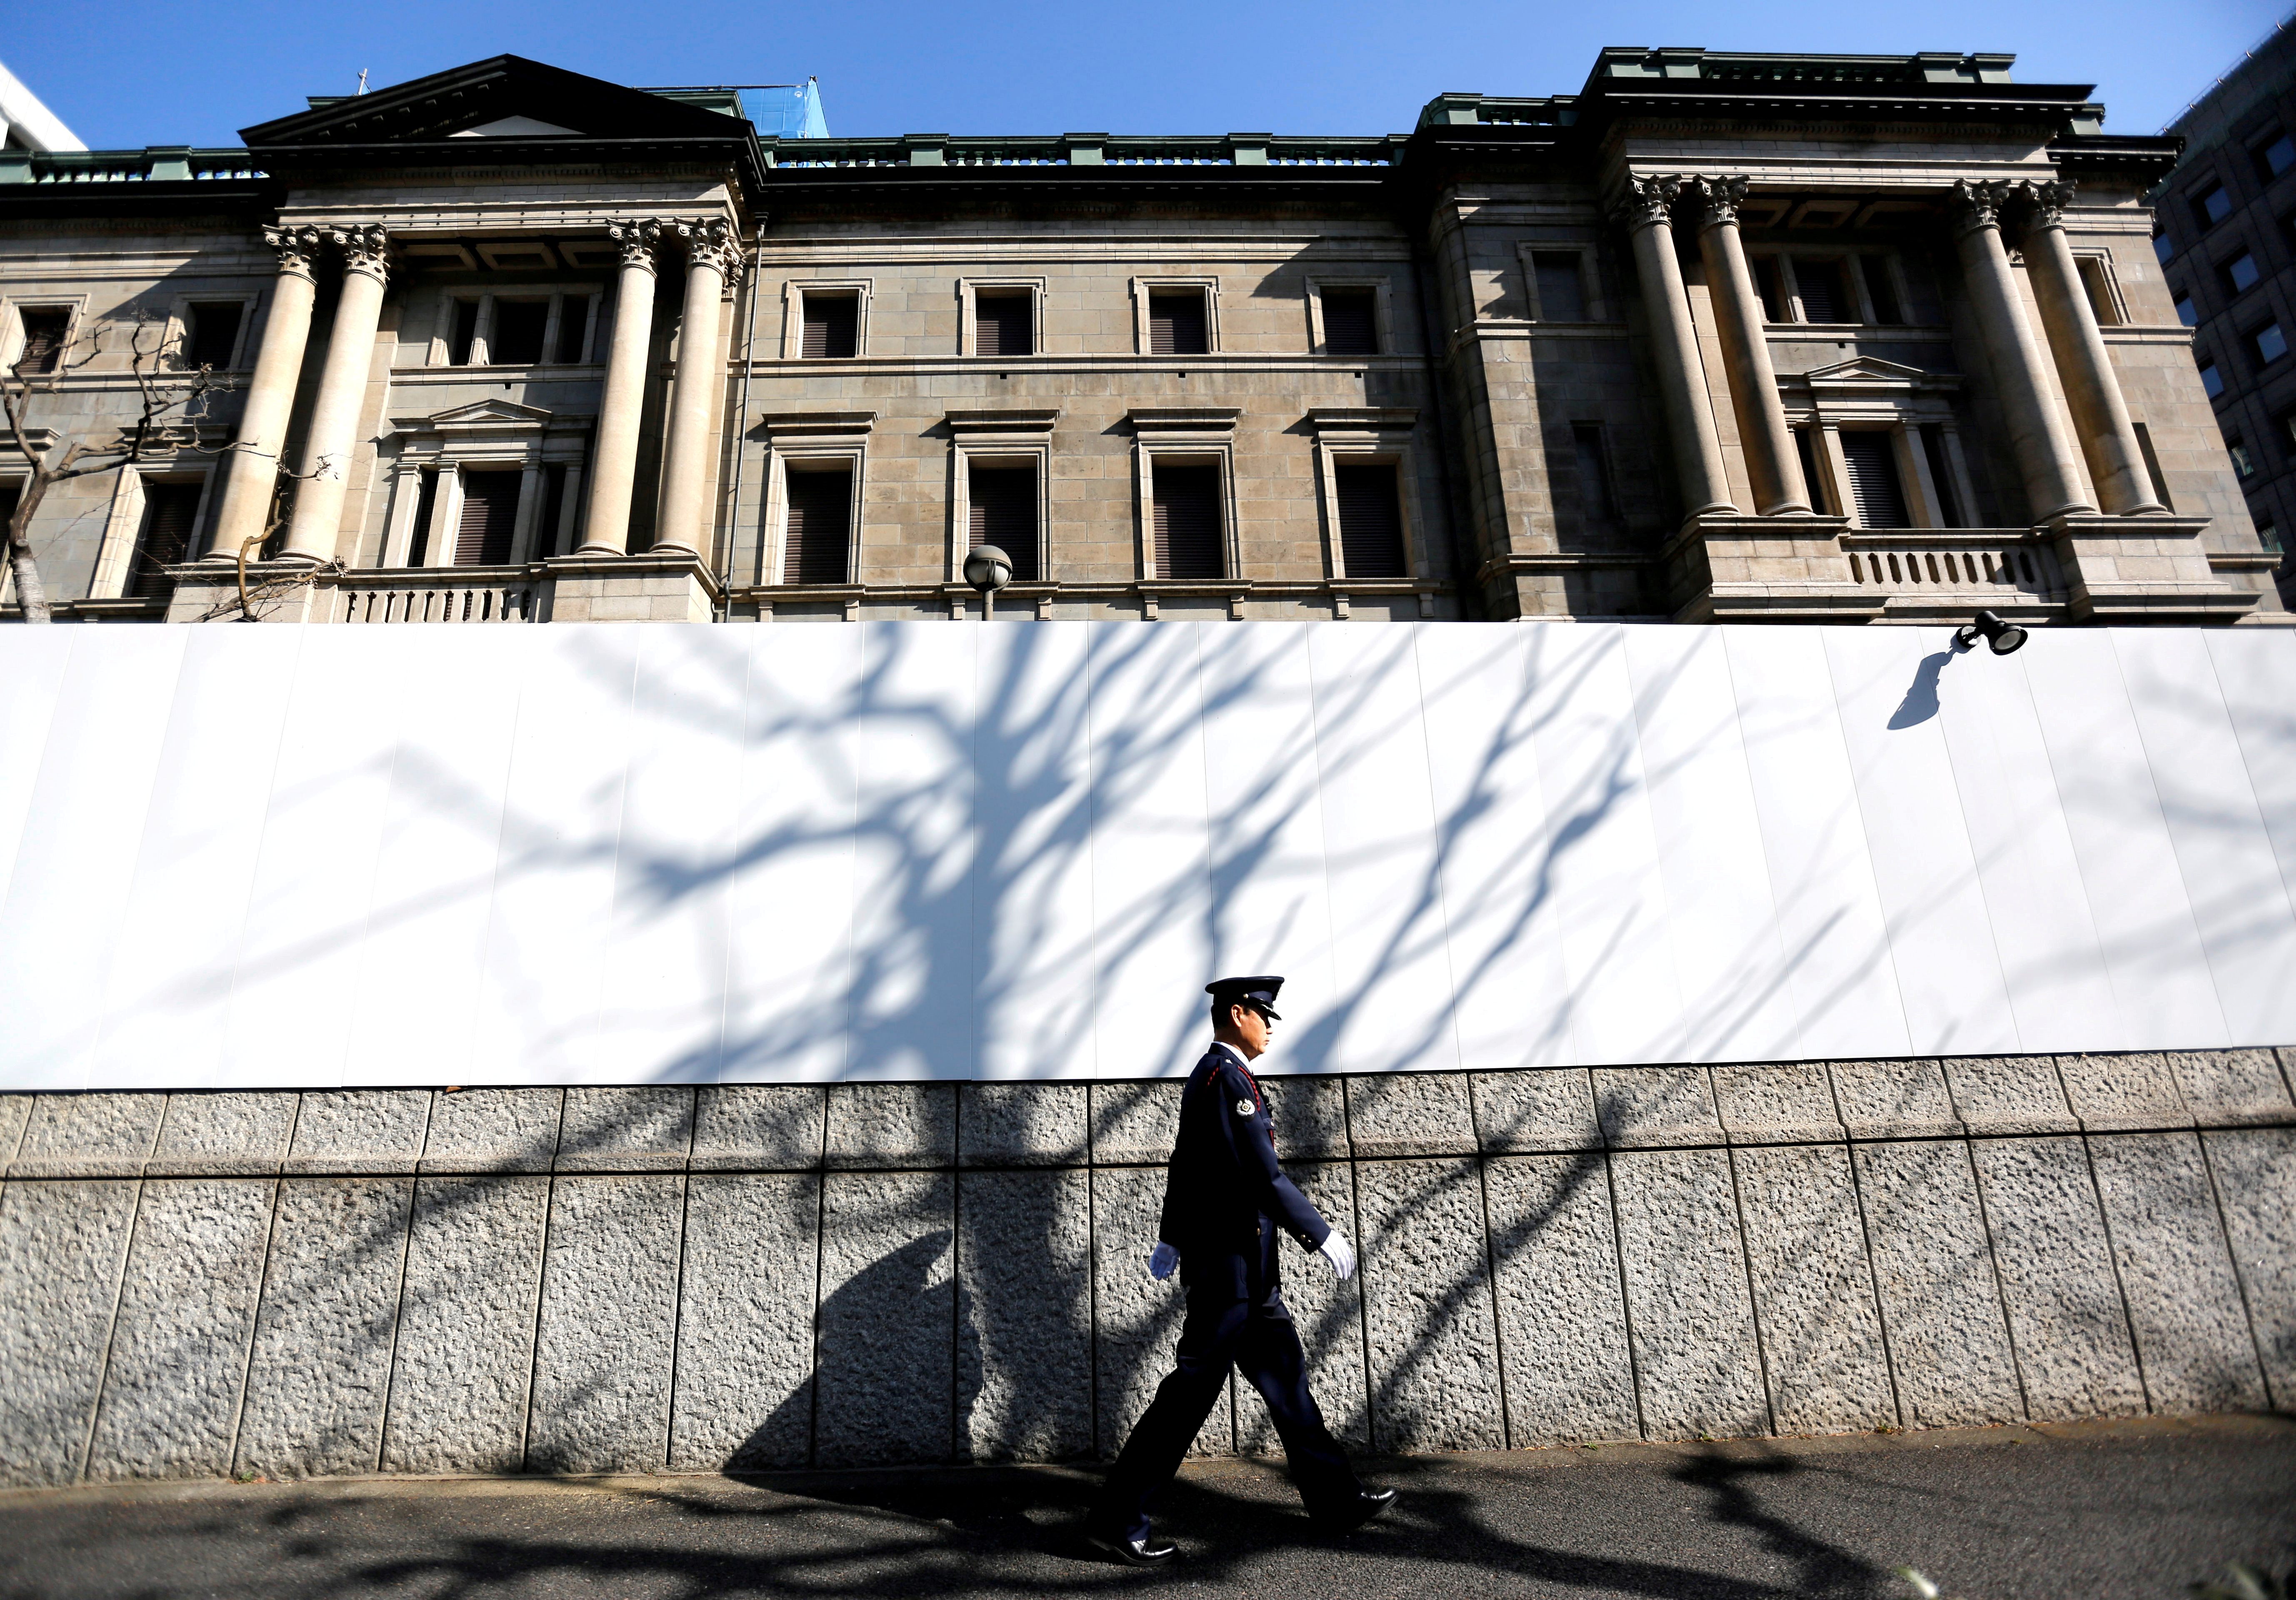 A security guard walks past in front of the Bank of Japan headquarters in Tokyo, Japan January 23, 2019. REUTERS/Issei Kato